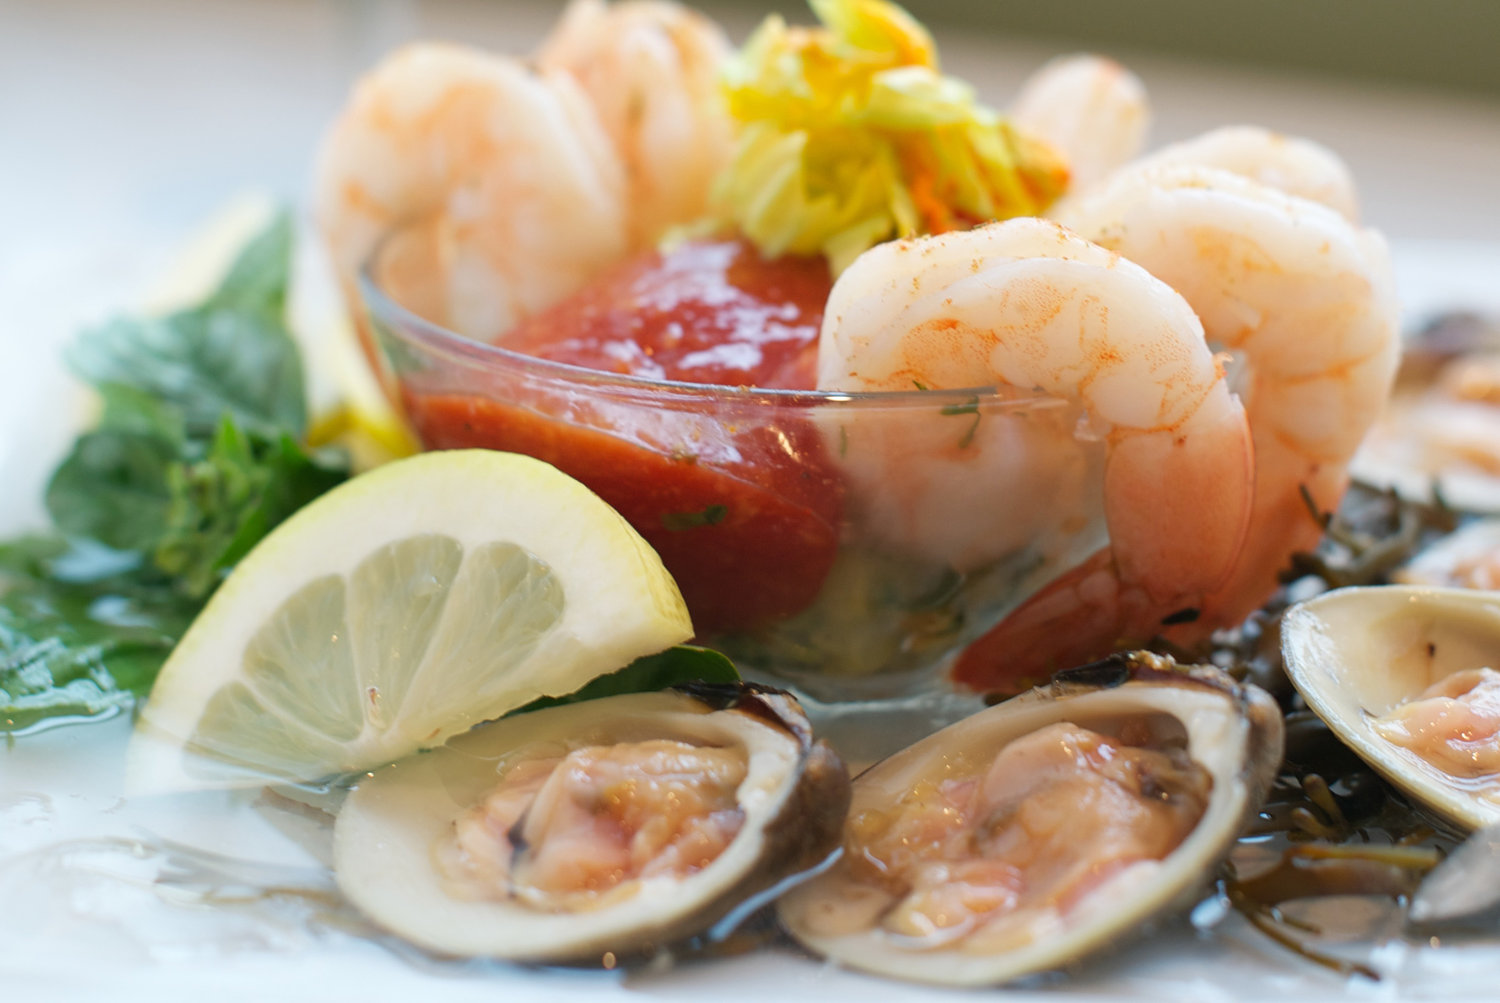 Grab a seat on the patio and dig into fresh seafood and more from The Breachway Grill